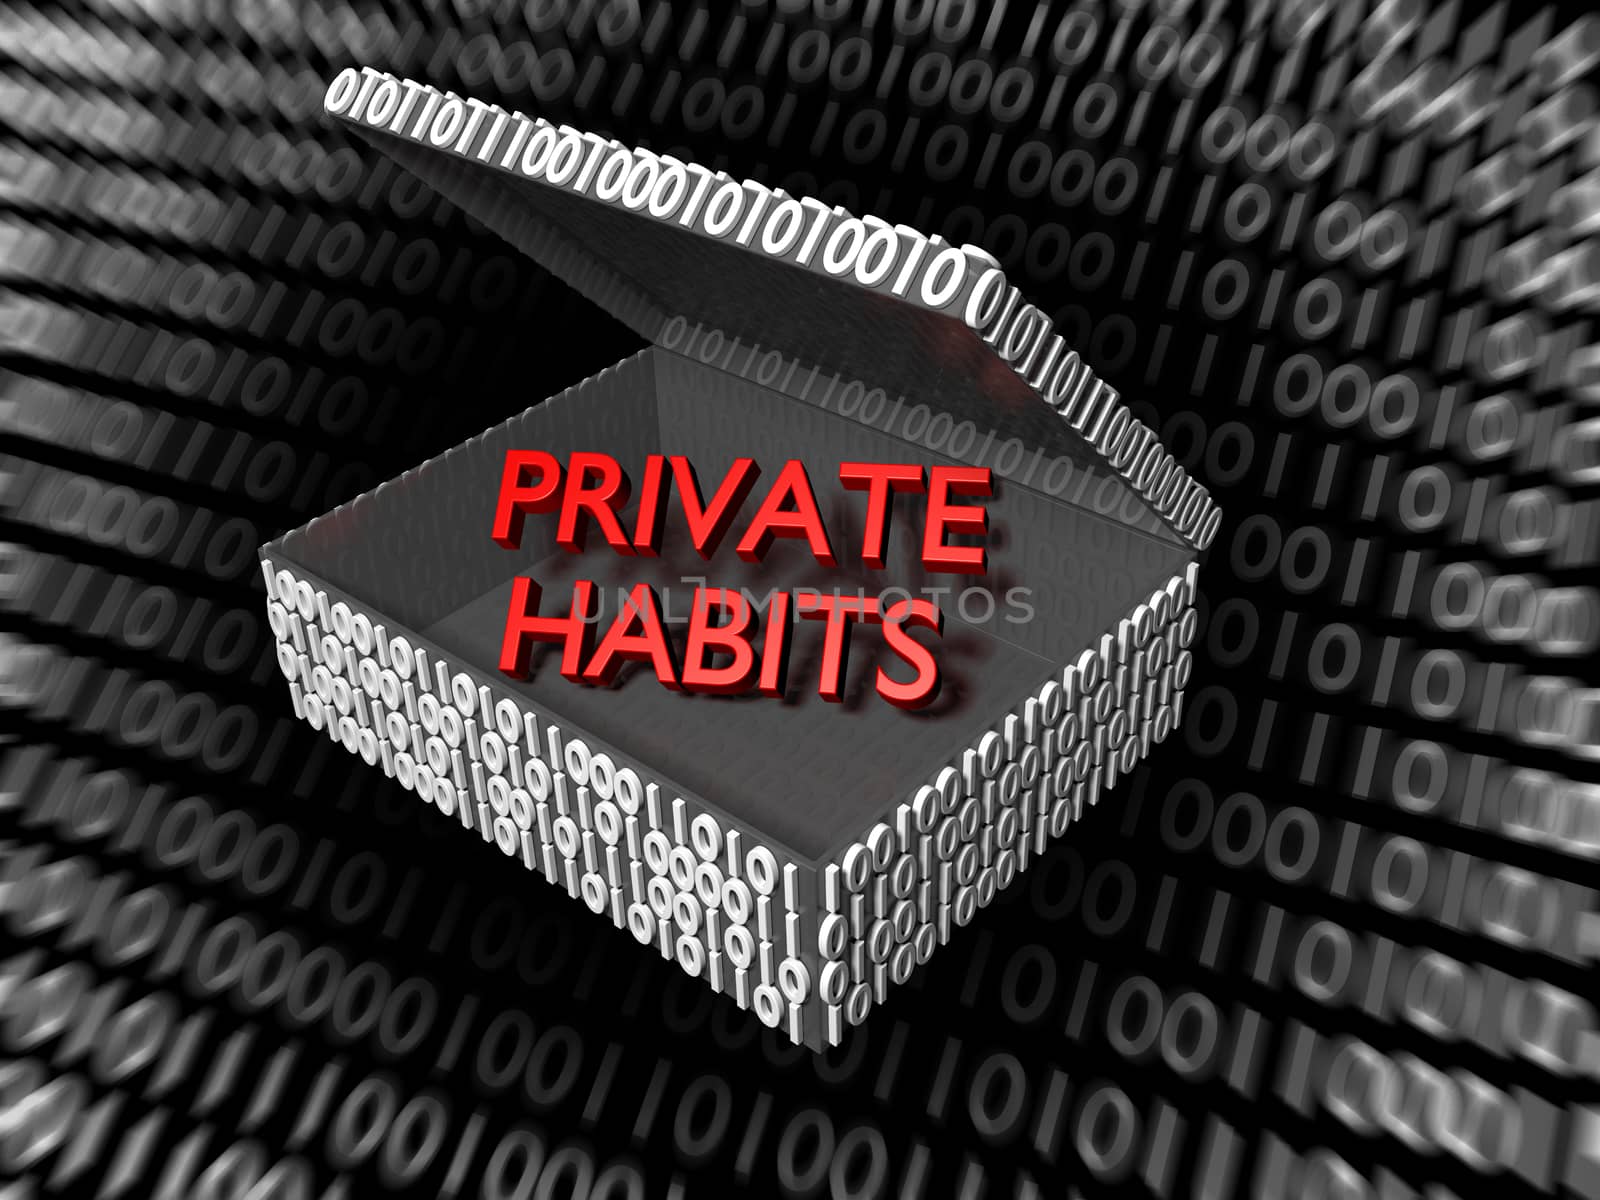 Private Habits in a Digital Box by shkyo30